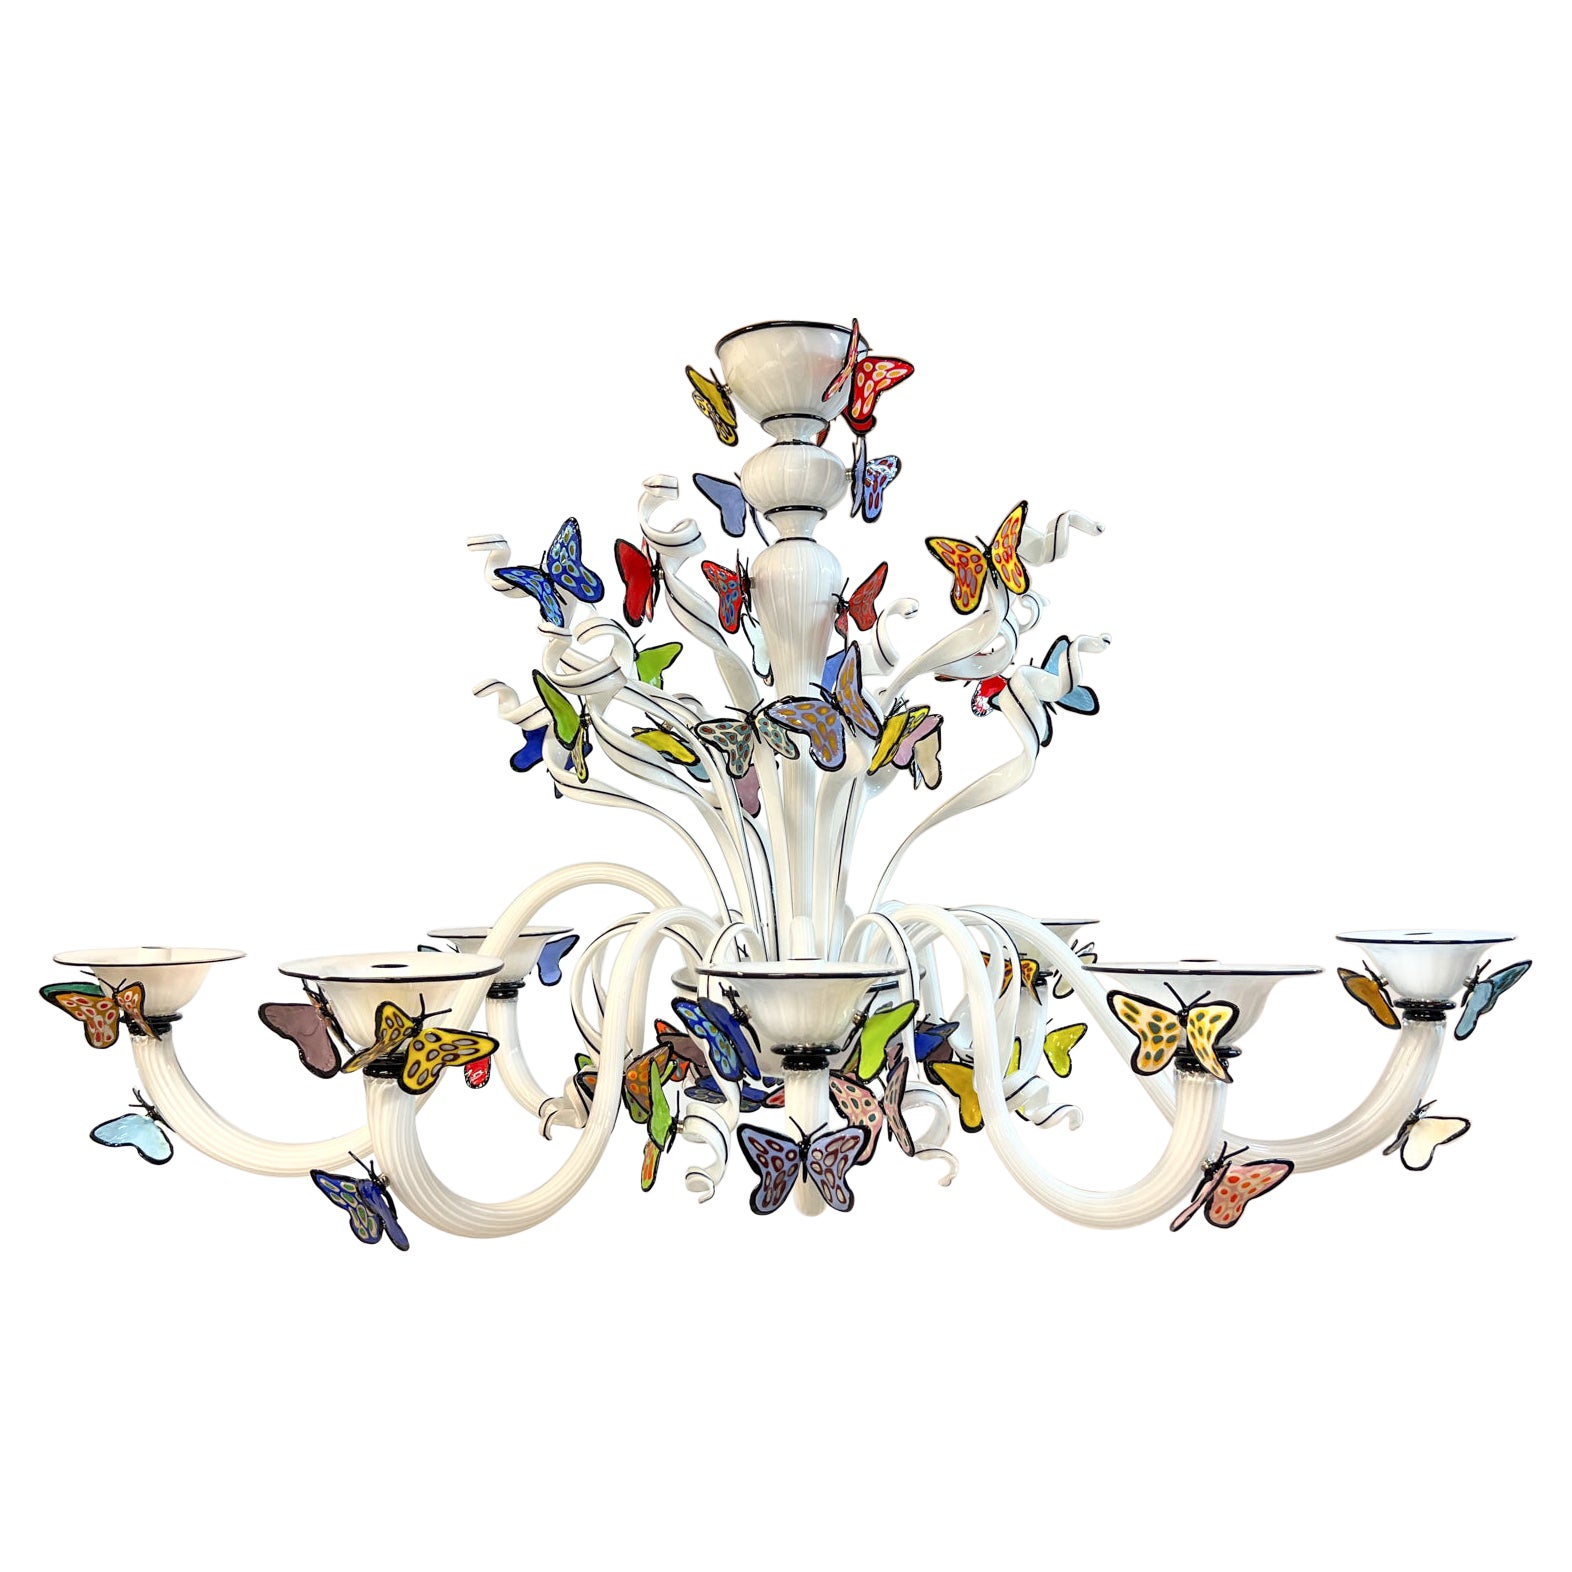 Costantini Diego Modern White Made Murano Glass Chandelier with Butterflies